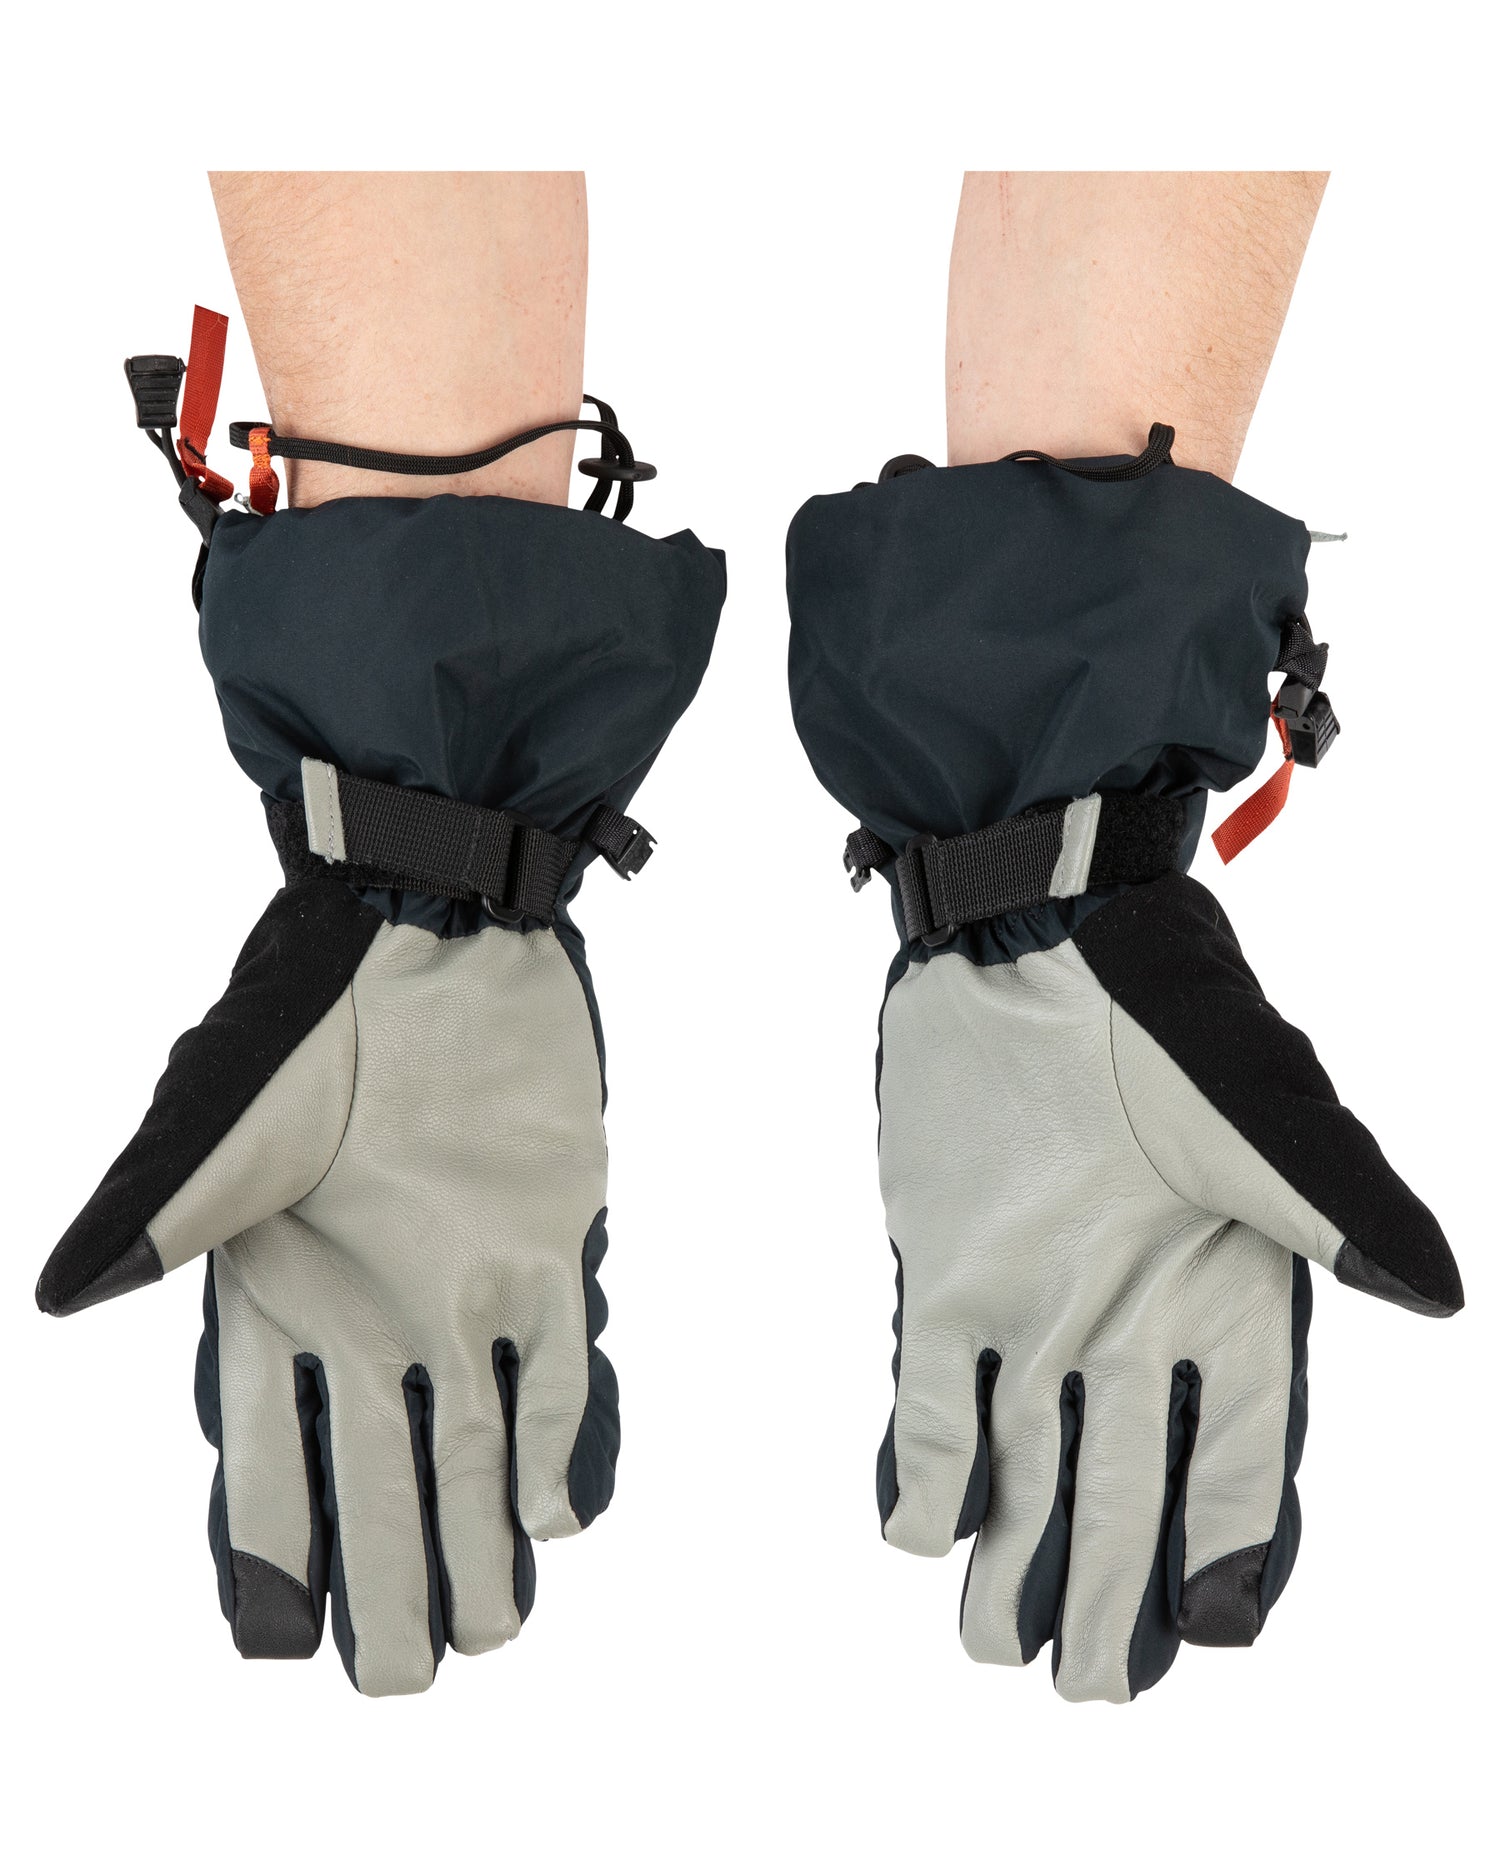 Simms Challenger Insulated Glove - Black,S